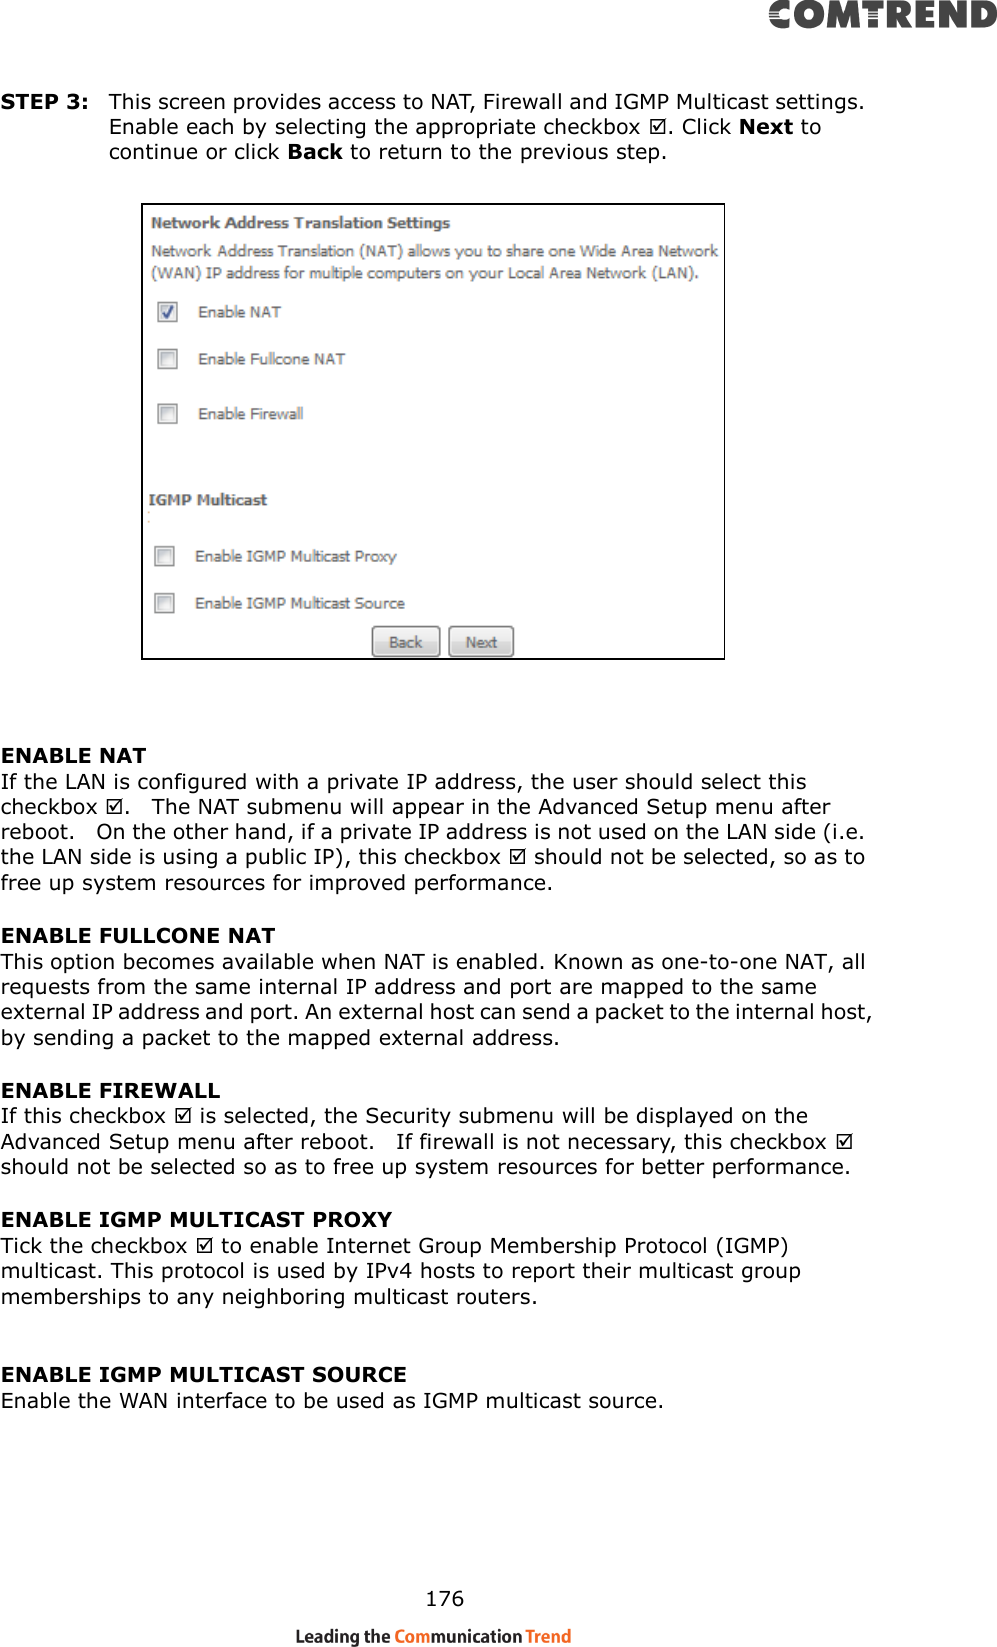    176 STEP 3:  This screen provides access to NAT, Firewall and IGMP Multicast settings. Enable each by selecting the appropriate checkbox . Click Next to continue or click Back to return to the previous step.    ENABLE NAT If the LAN is configured with a private IP address, the user should select this checkbox .   The NAT submenu will appear in the Advanced Setup menu after reboot.   On the other hand, if a private IP address is not used on the LAN side (i.e. the LAN side is using a public IP), this checkbox  should not be selected, so as to free up system resources for improved performance. ENABLE FULLCONE NAT     This option becomes available when NAT is enabled. Known as one-to-one NAT, all requests from the same internal IP address and port are mapped to the same external IP address and port. An external host can send a packet to the internal host, by sending a packet to the mapped external address. ENABLE FIREWALL If this checkbox  is selected, the Security submenu will be displayed on the Advanced Setup menu after reboot.    If firewall is not necessary, this checkbox  should not be selected so as to free up system resources for better performance.     ENABLE IGMP MULTICAST PROXY Tick the checkbox  to enable Internet Group Membership Protocol (IGMP) multicast. This protocol is used by IPv4 hosts to report their multicast group memberships to any neighboring multicast routers.  ENABLE IGMP MULTICAST SOURCE Enable the WAN interface to be used as IGMP multicast source.        